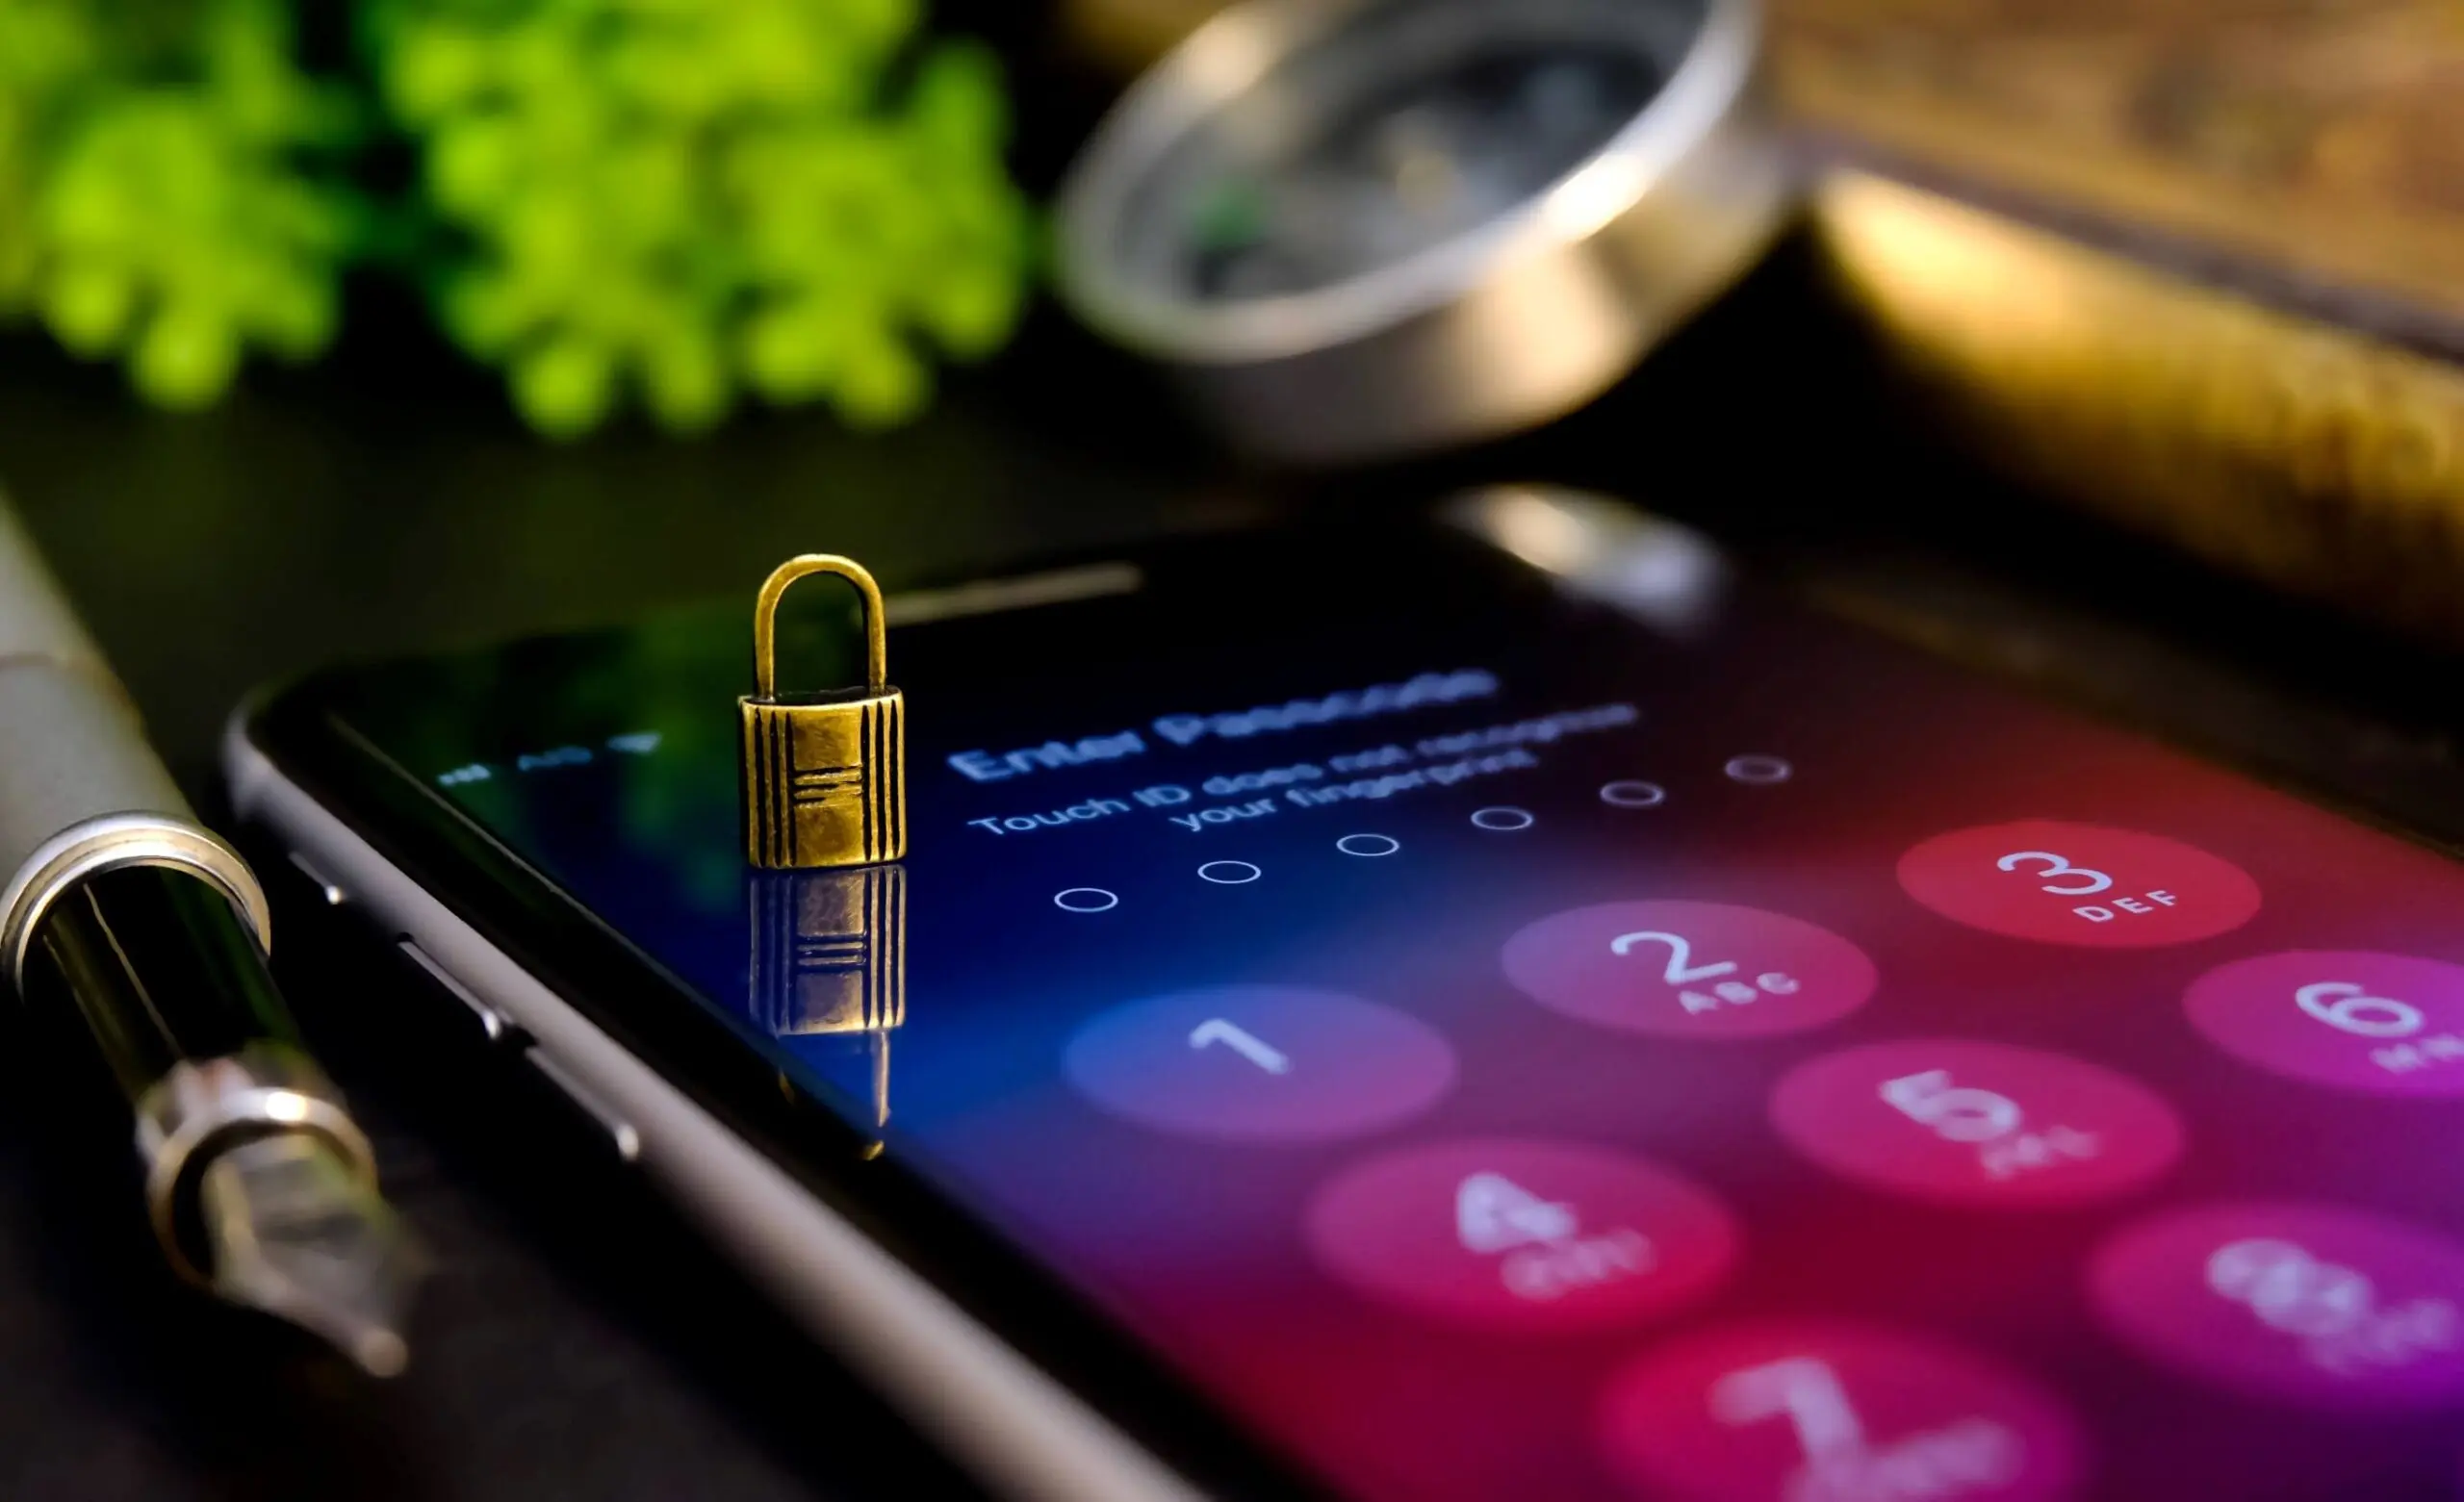 5 Essential Hacks to Safeguard Your Mobile Apps